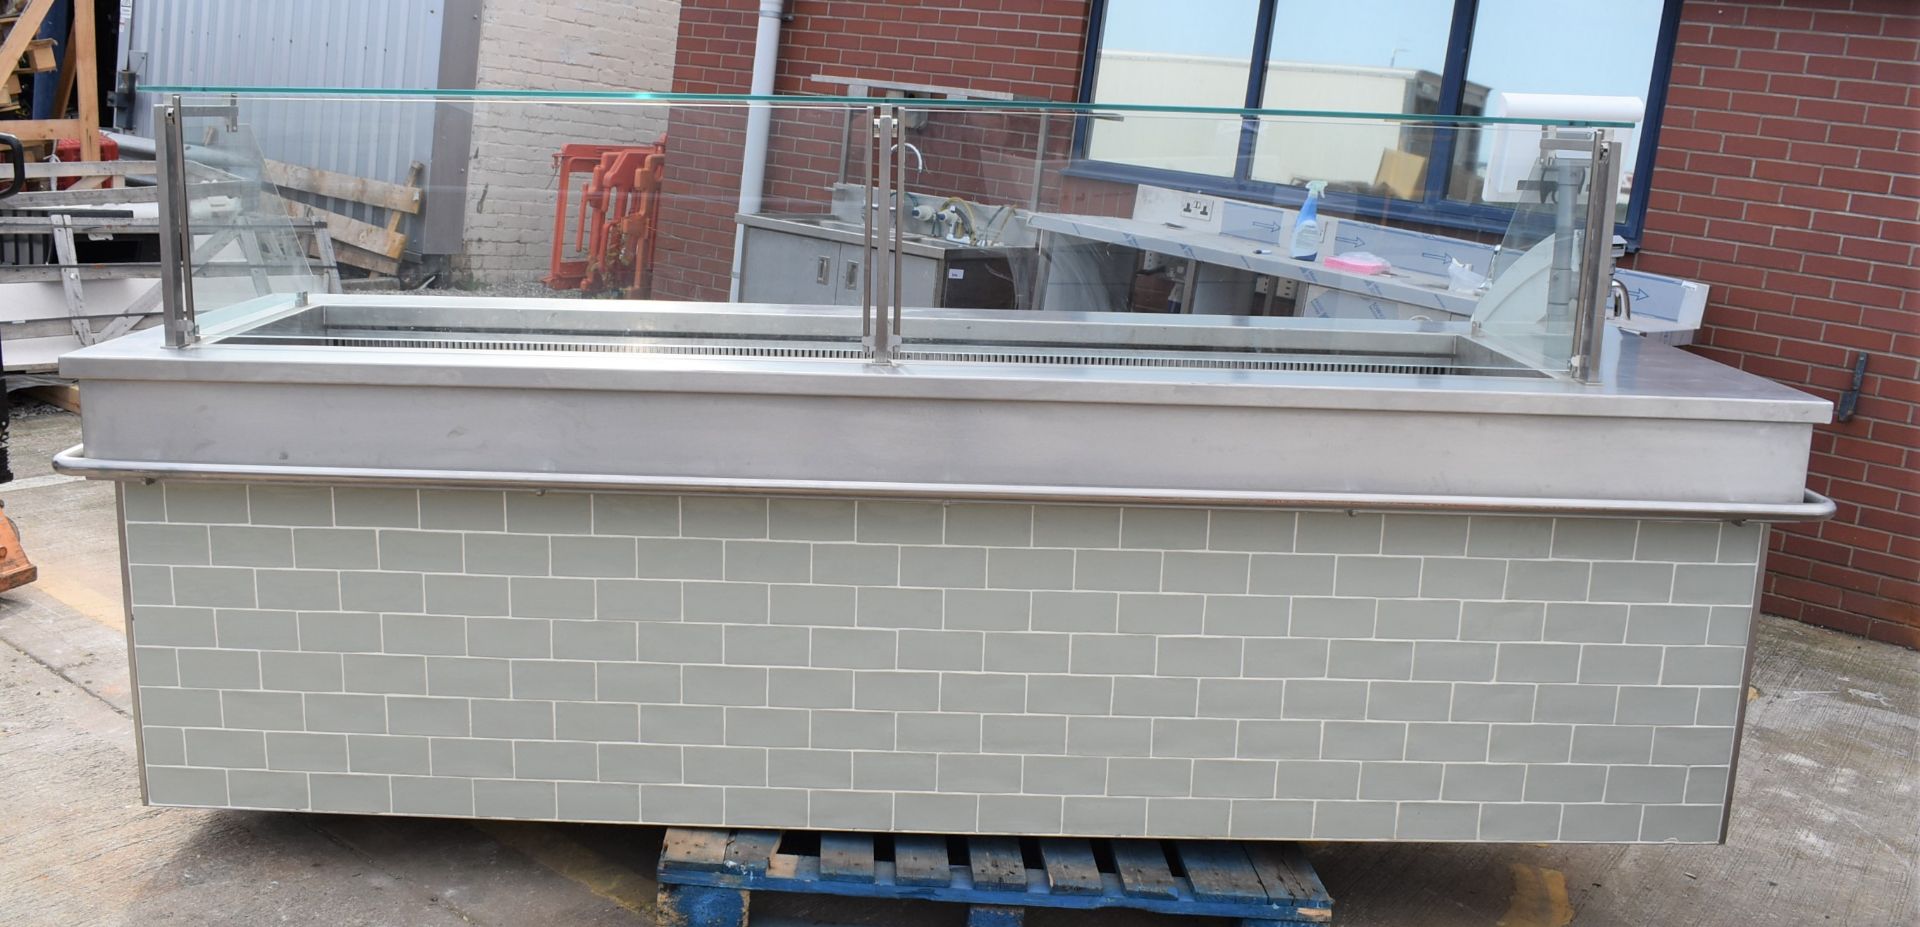 1 x Commercial Food Display Counter Featuring a Fan Blown Well, Glass Viewing Screen, Tiles Front - Image 23 of 60